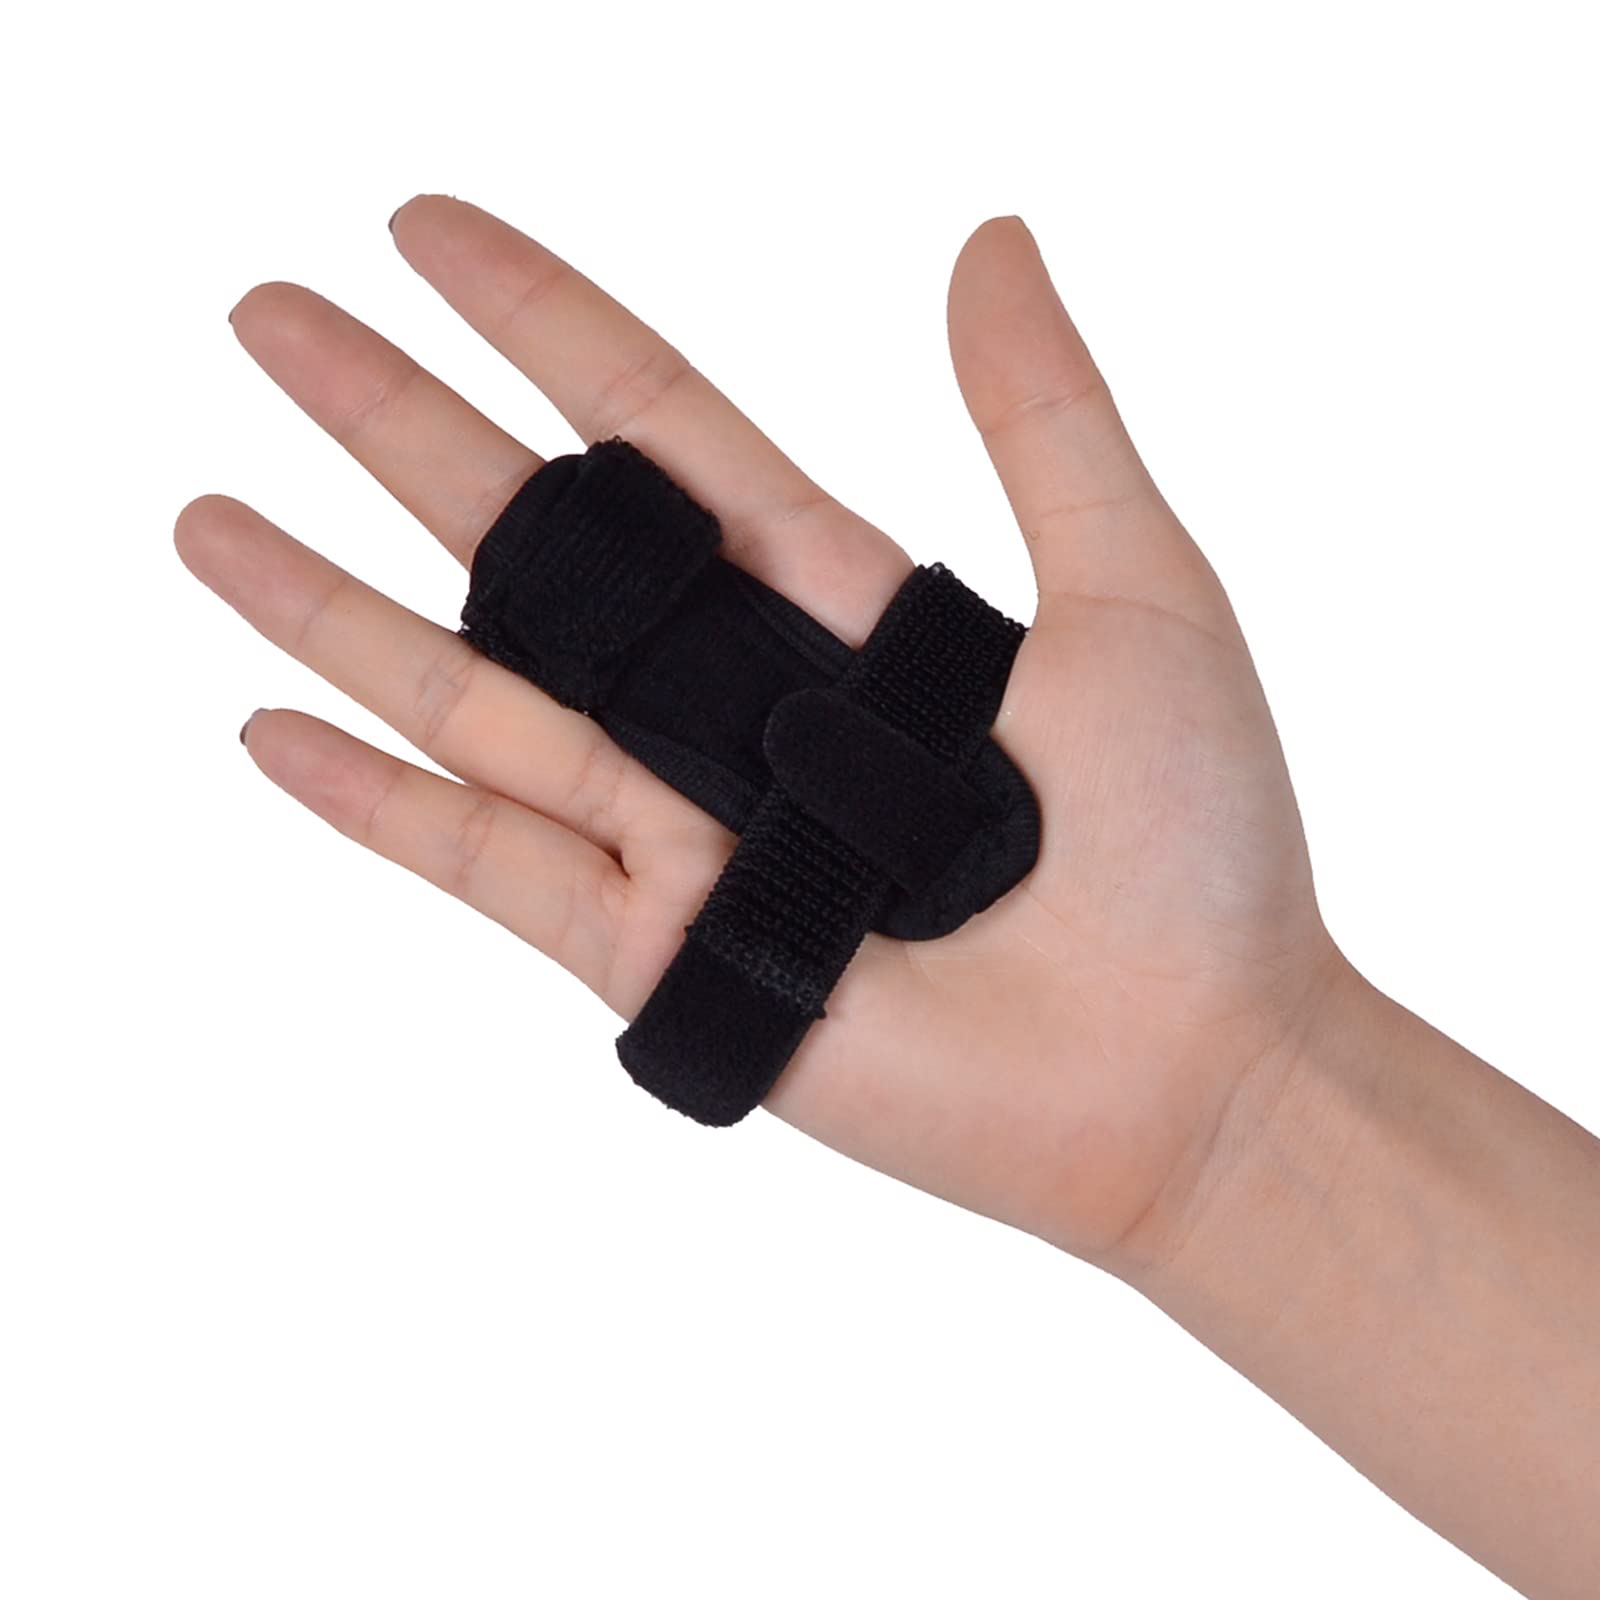 Buy WITSOUL Boxer Finger Splint - Supports Pinky, Ring, Middle Metacarpals  and Knuckles - Right or Left Both Hand Adjustable Brace (COLOR GREY) (M)  Online at Low Prices in India - Amazon.in